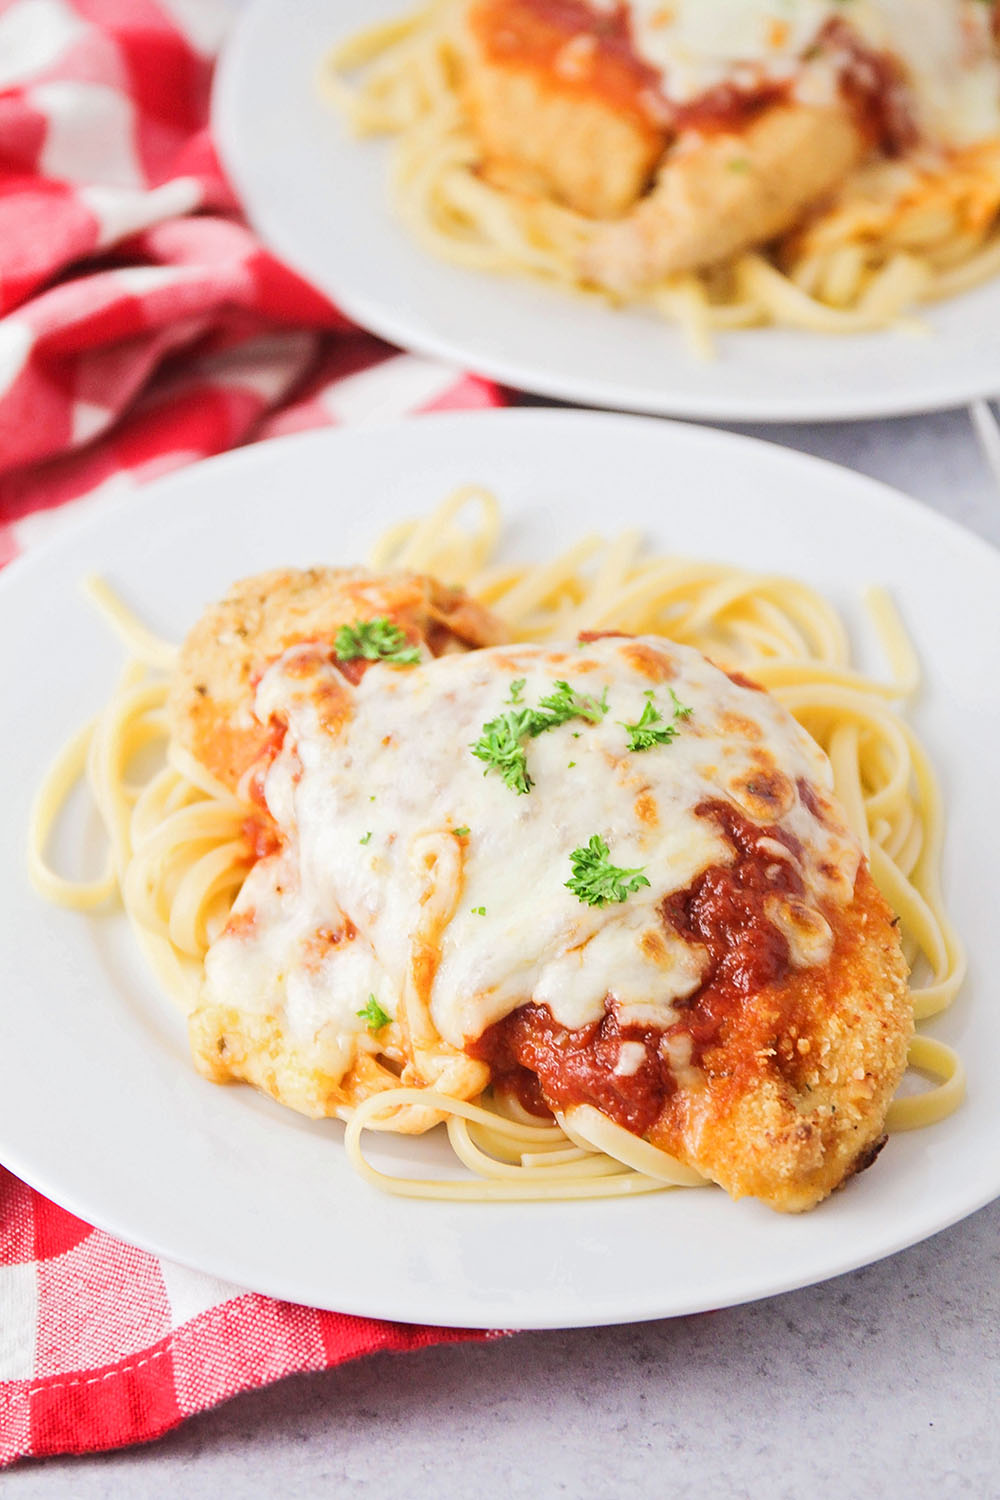 This easy chicken parmesan is a simple and flavorful main dish that's quick to make, and a family favorite!